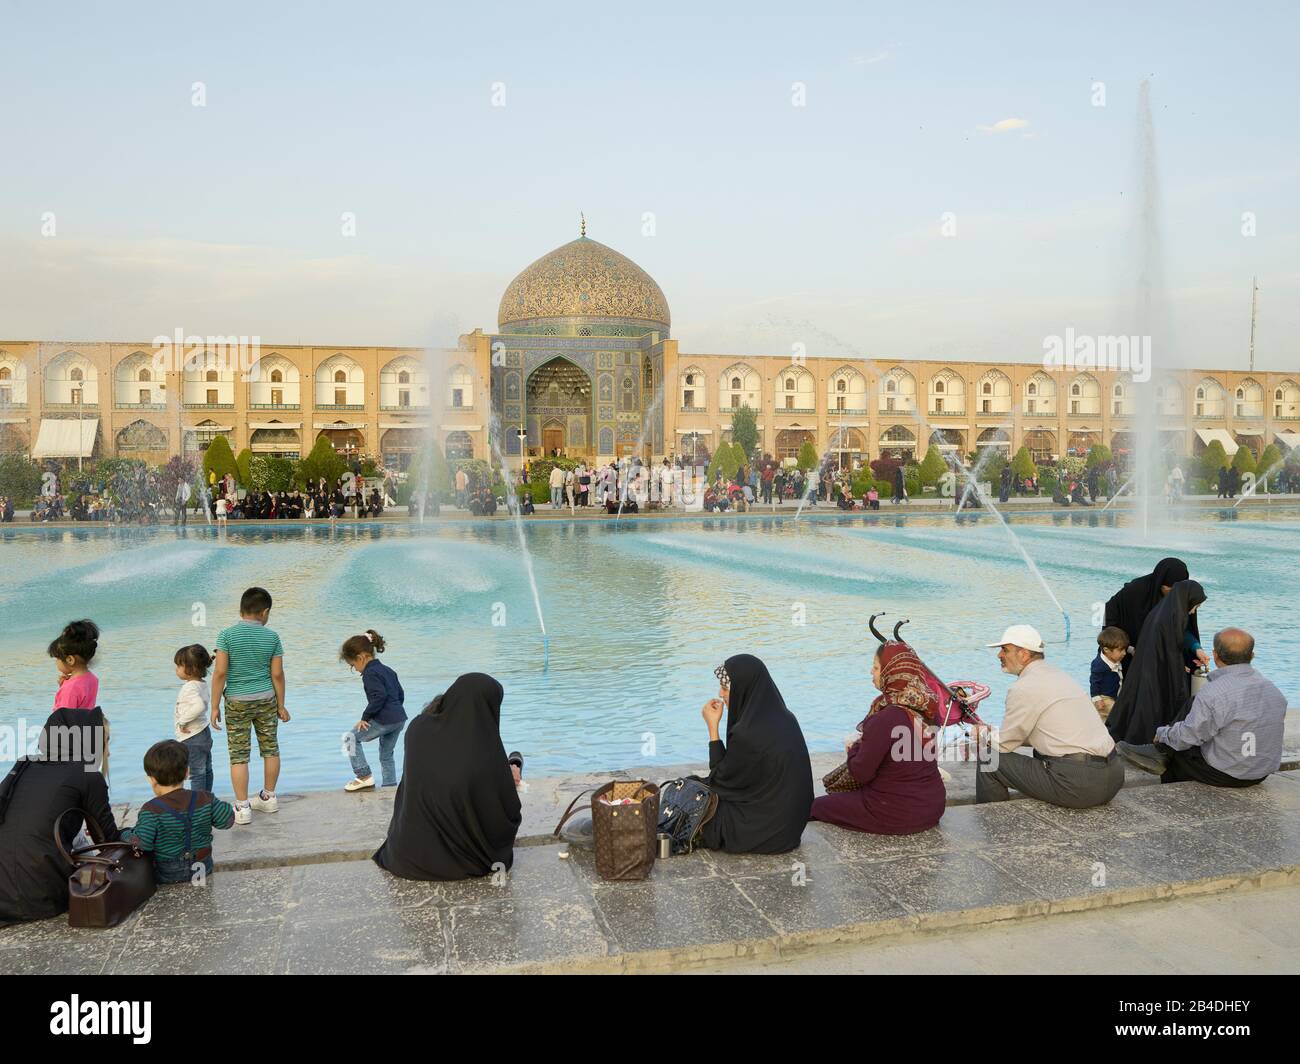 Isfahan, Iran. 24th Apr, 2017. The Sheikh Lotfollah Mosque in Imam Square (Meidan-e Emam) in the Iranian city of Isfahan, taken on 04/24/2017. | usage worldwide Credit: dpa/Alamy Live News Stock Photo